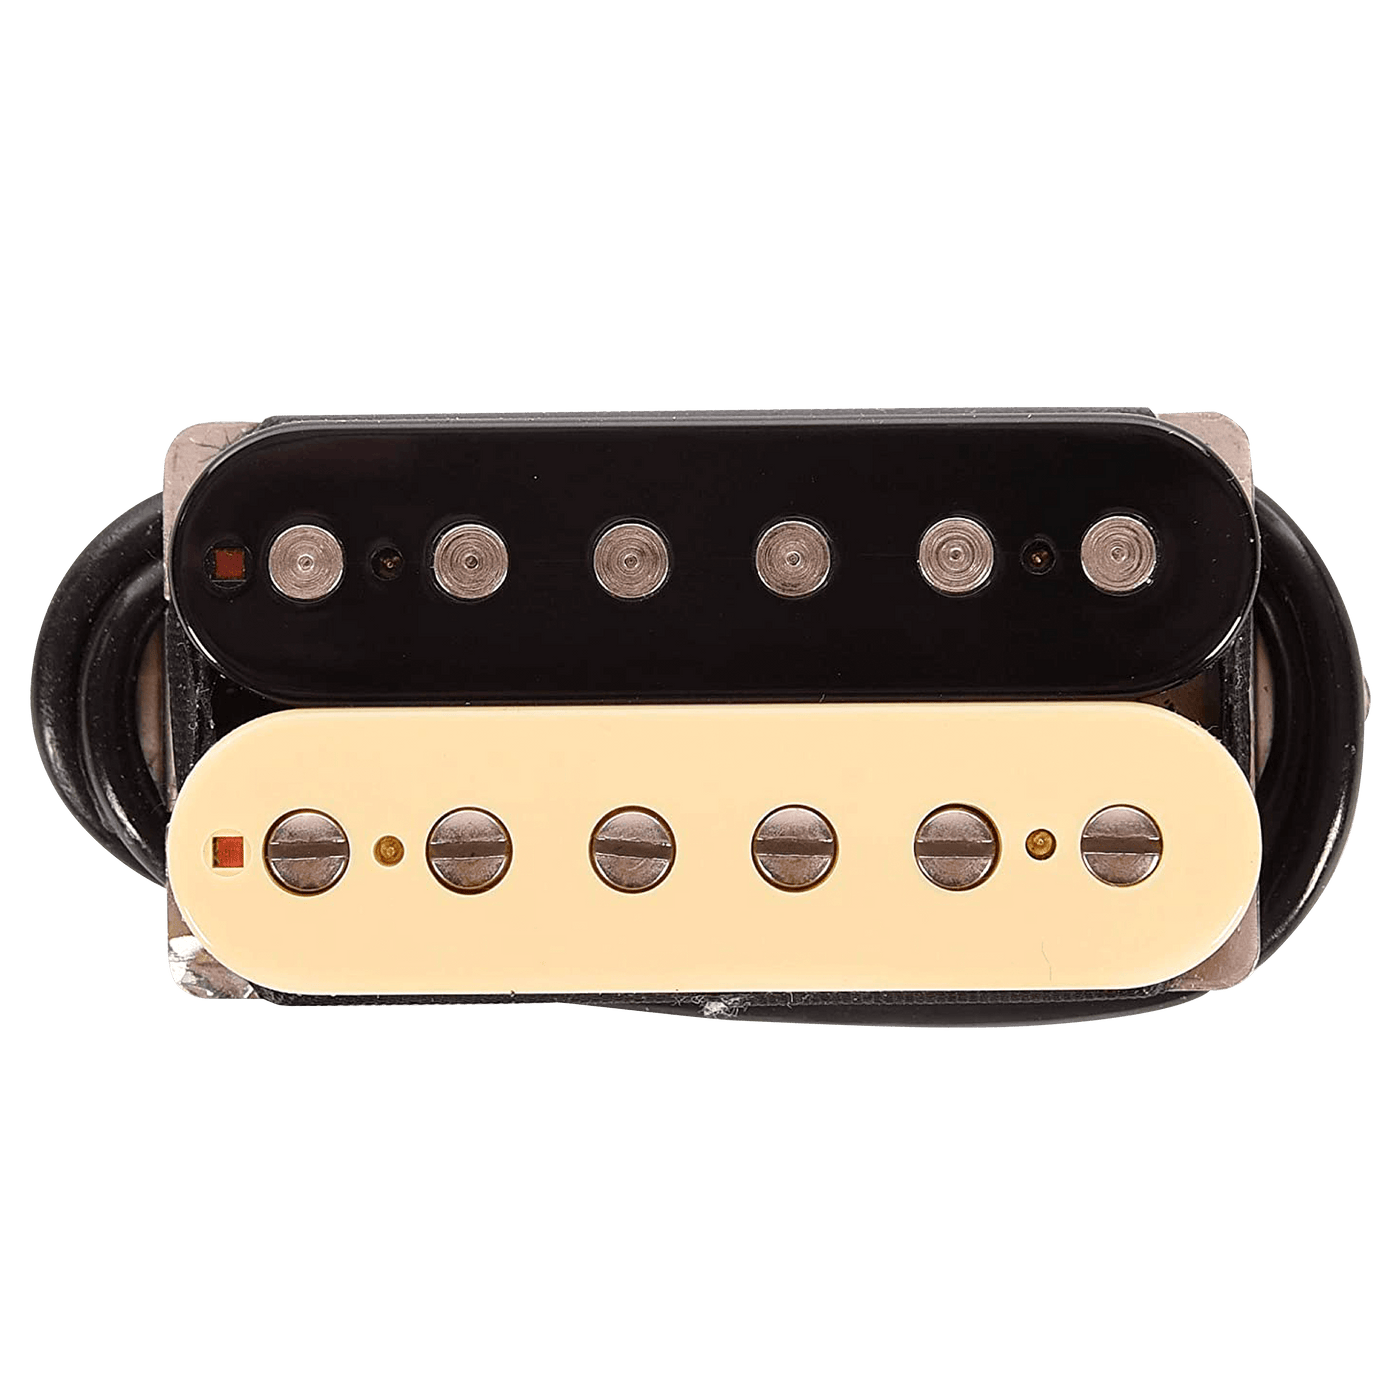 Suhr SSH Plus Humbucker Zebra (Bridge) - $149990 - Gearhub - A true high output humbucker, the SSH+ covers a broad musical base with musicality, punch, authority, and tone. The pickup exhibits excellent harmonic content, lots of midrange and a focused low end. Well suited for classic rock or metal. Spacing • 50mm DC Resistance • 18K Ω Hook Up Wire • 4-Conductor Magnets • Alnico V